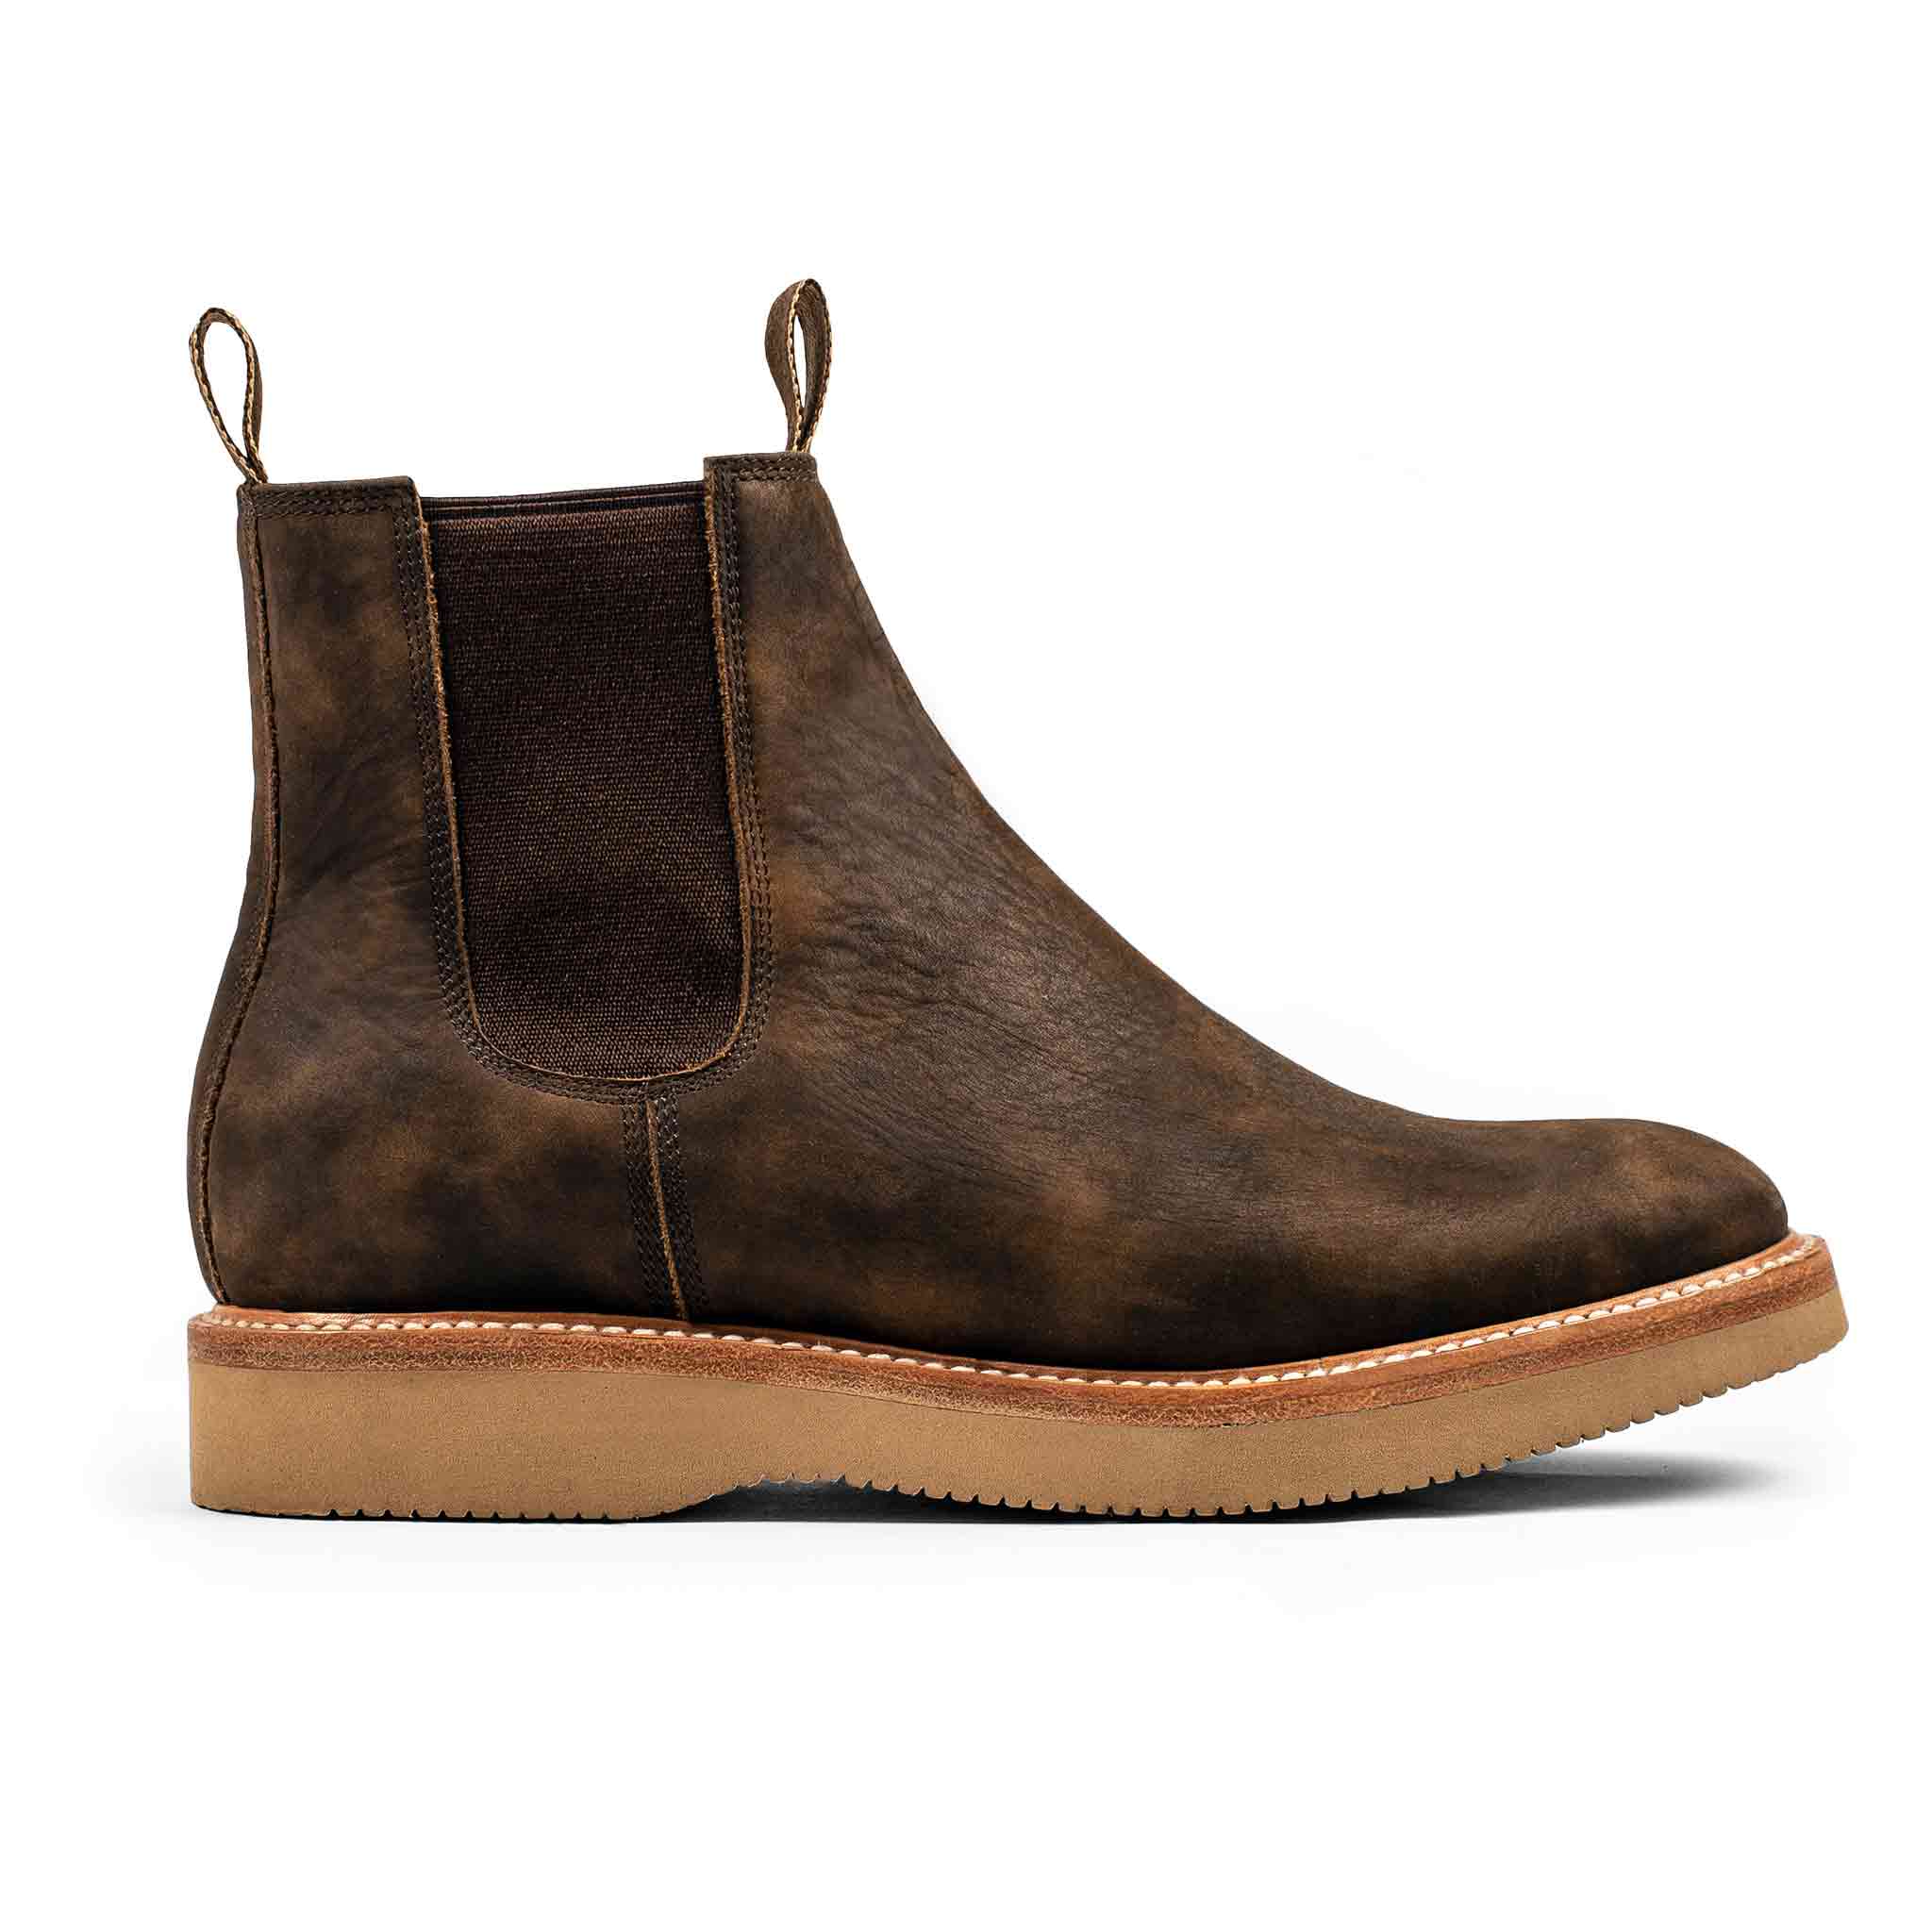 taylor stitch chelsea boot